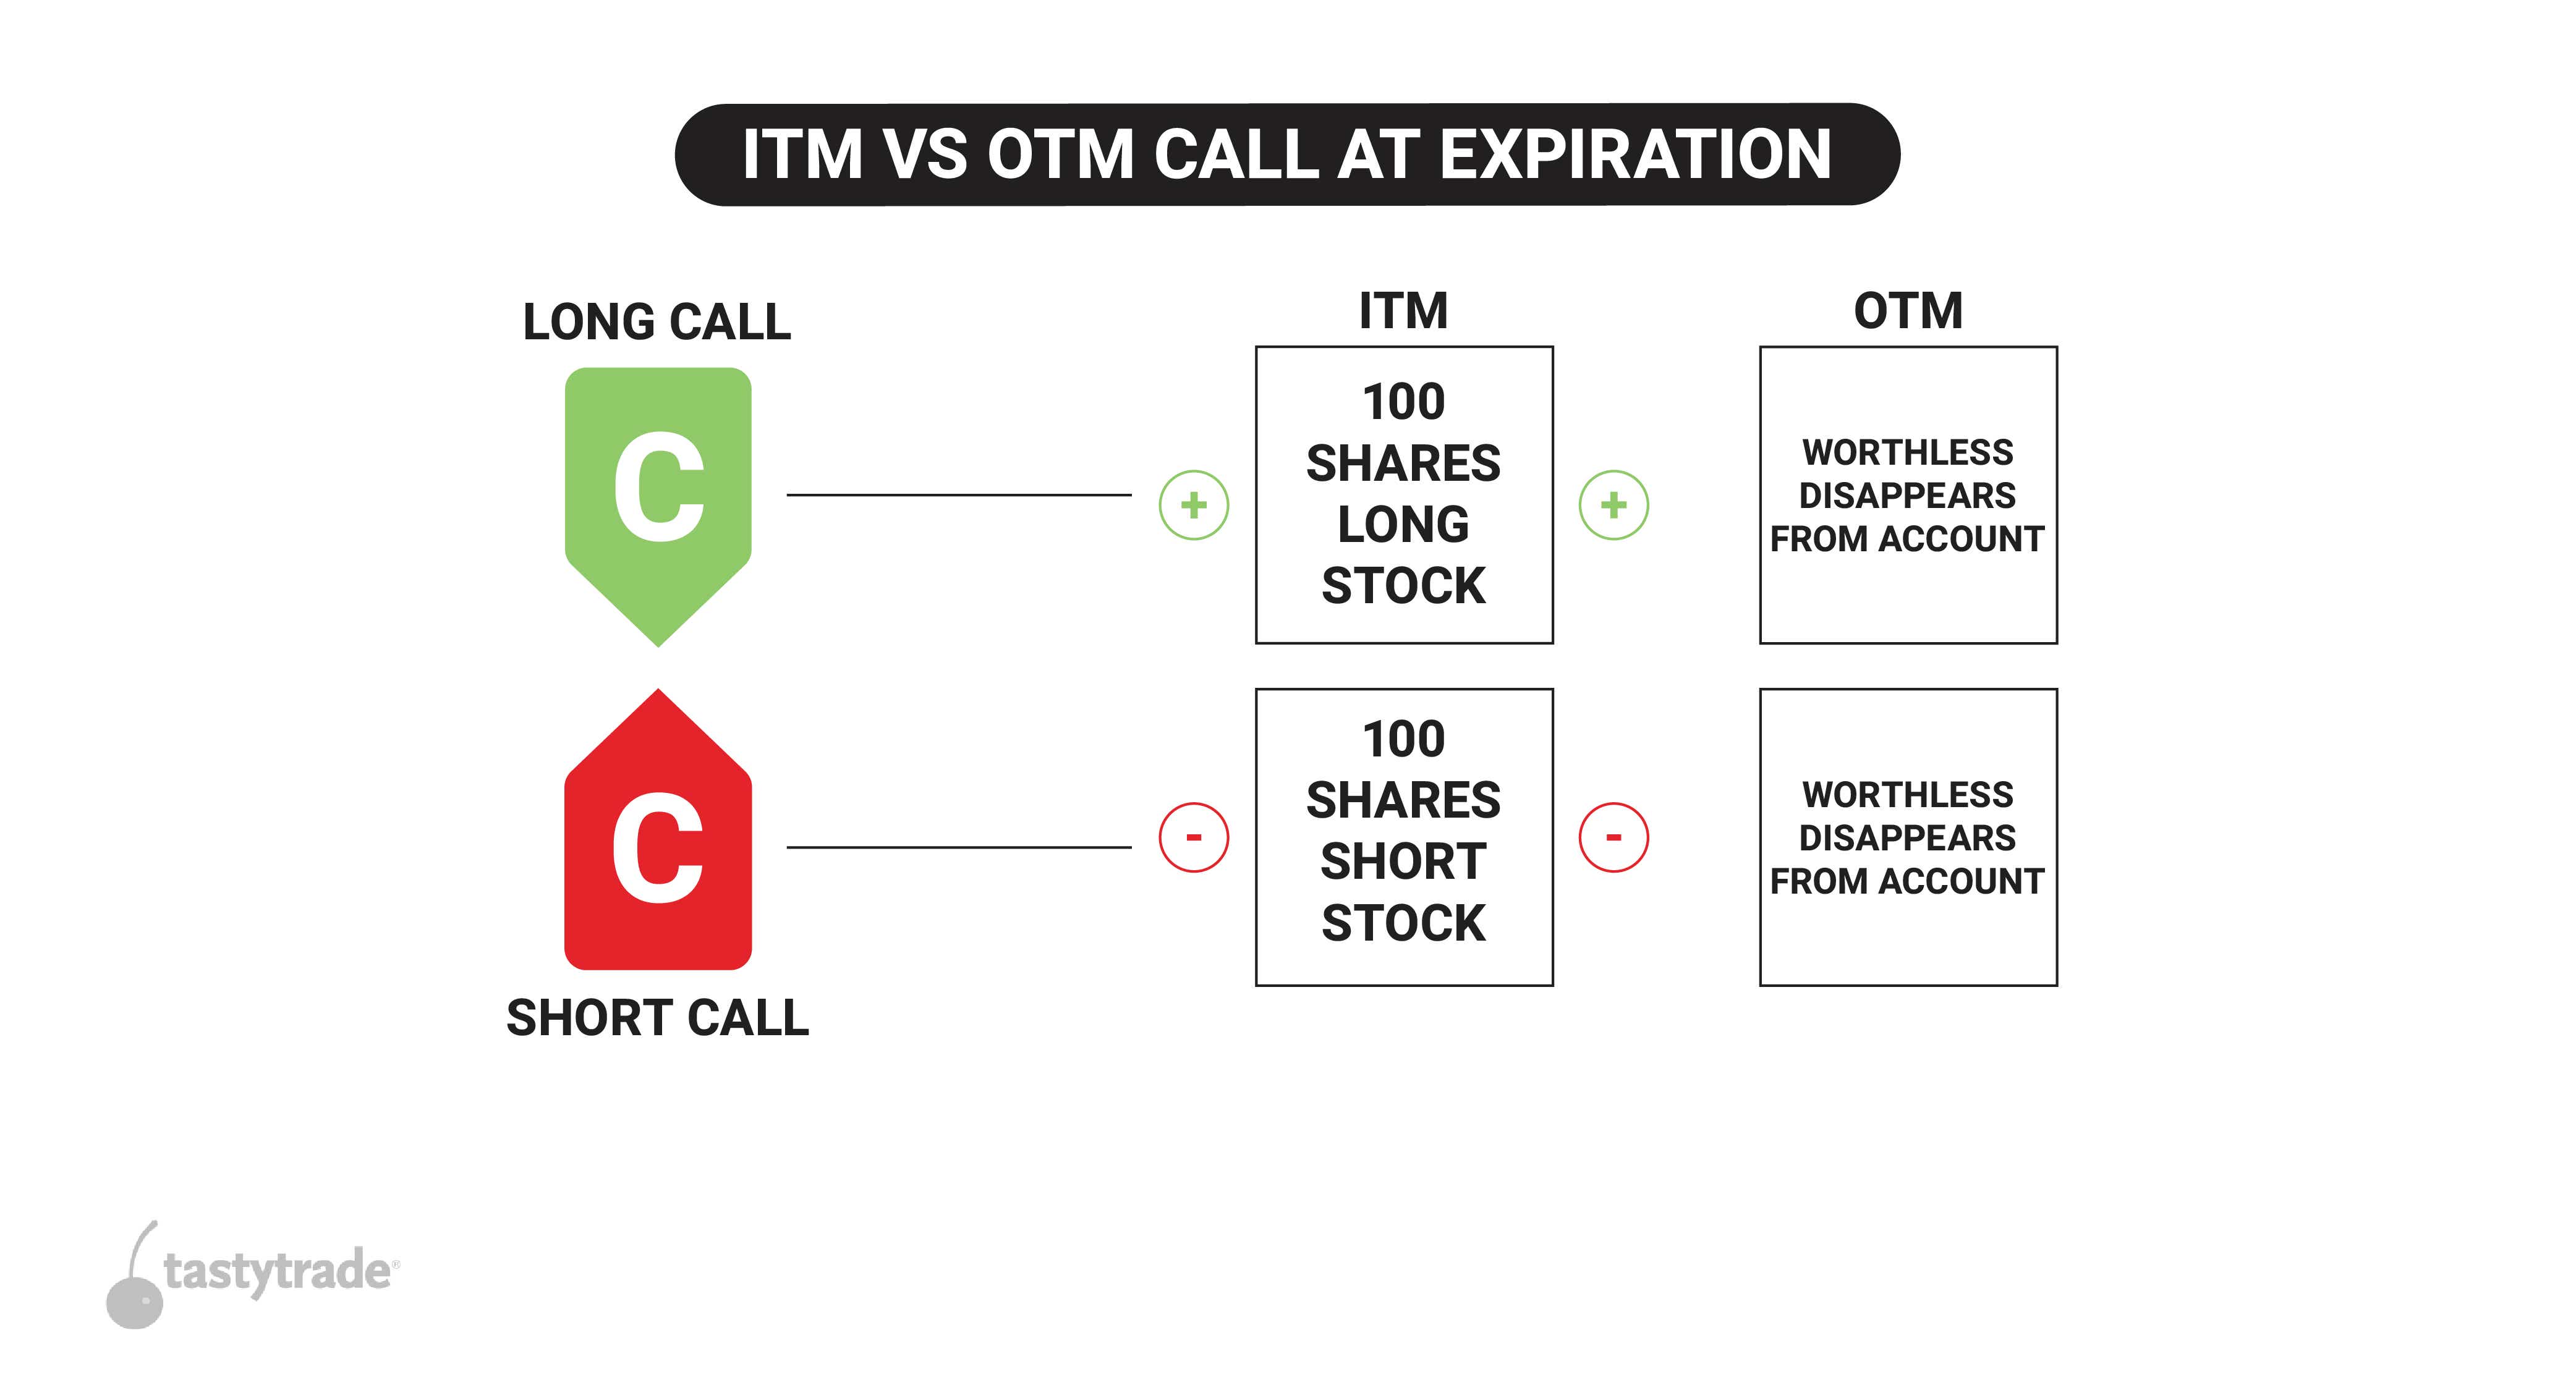 ITM call assignment